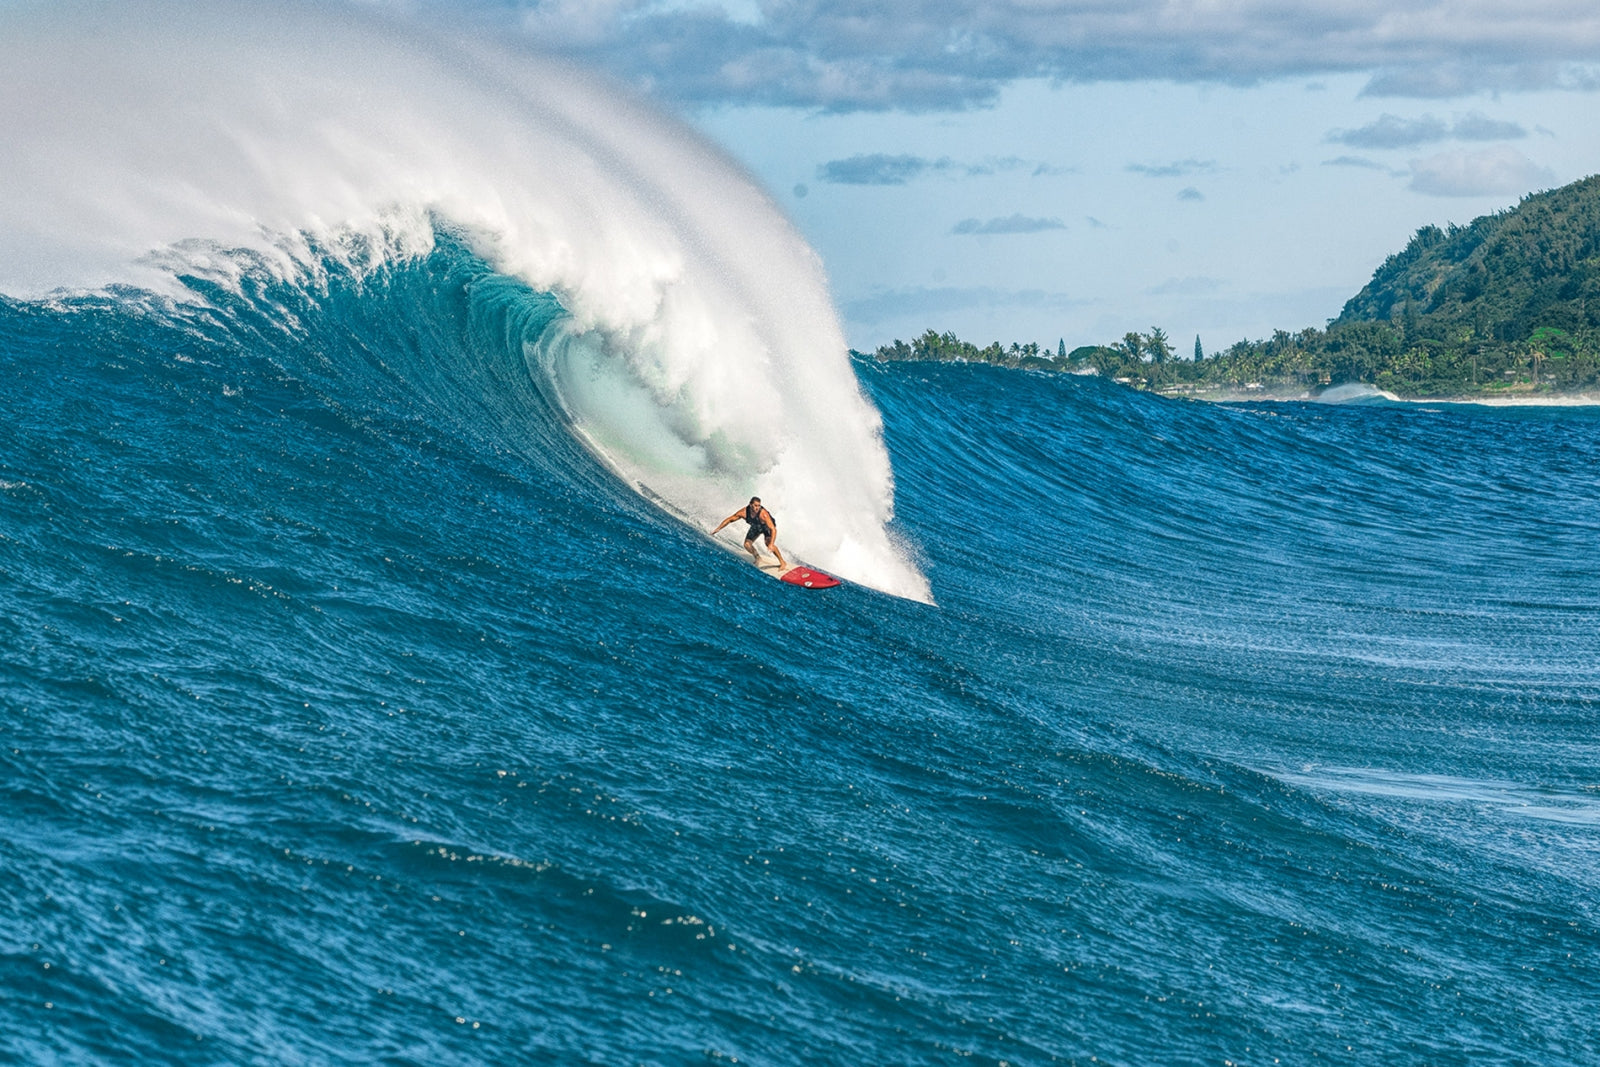 When not cleaning up the harbors around his home island, or working with wood in his North Shore shop, Wilkinson’s busy paddling into what O‘ahu’s outer reefs have on offer. Photo: Jean Louis de Heeckeren.